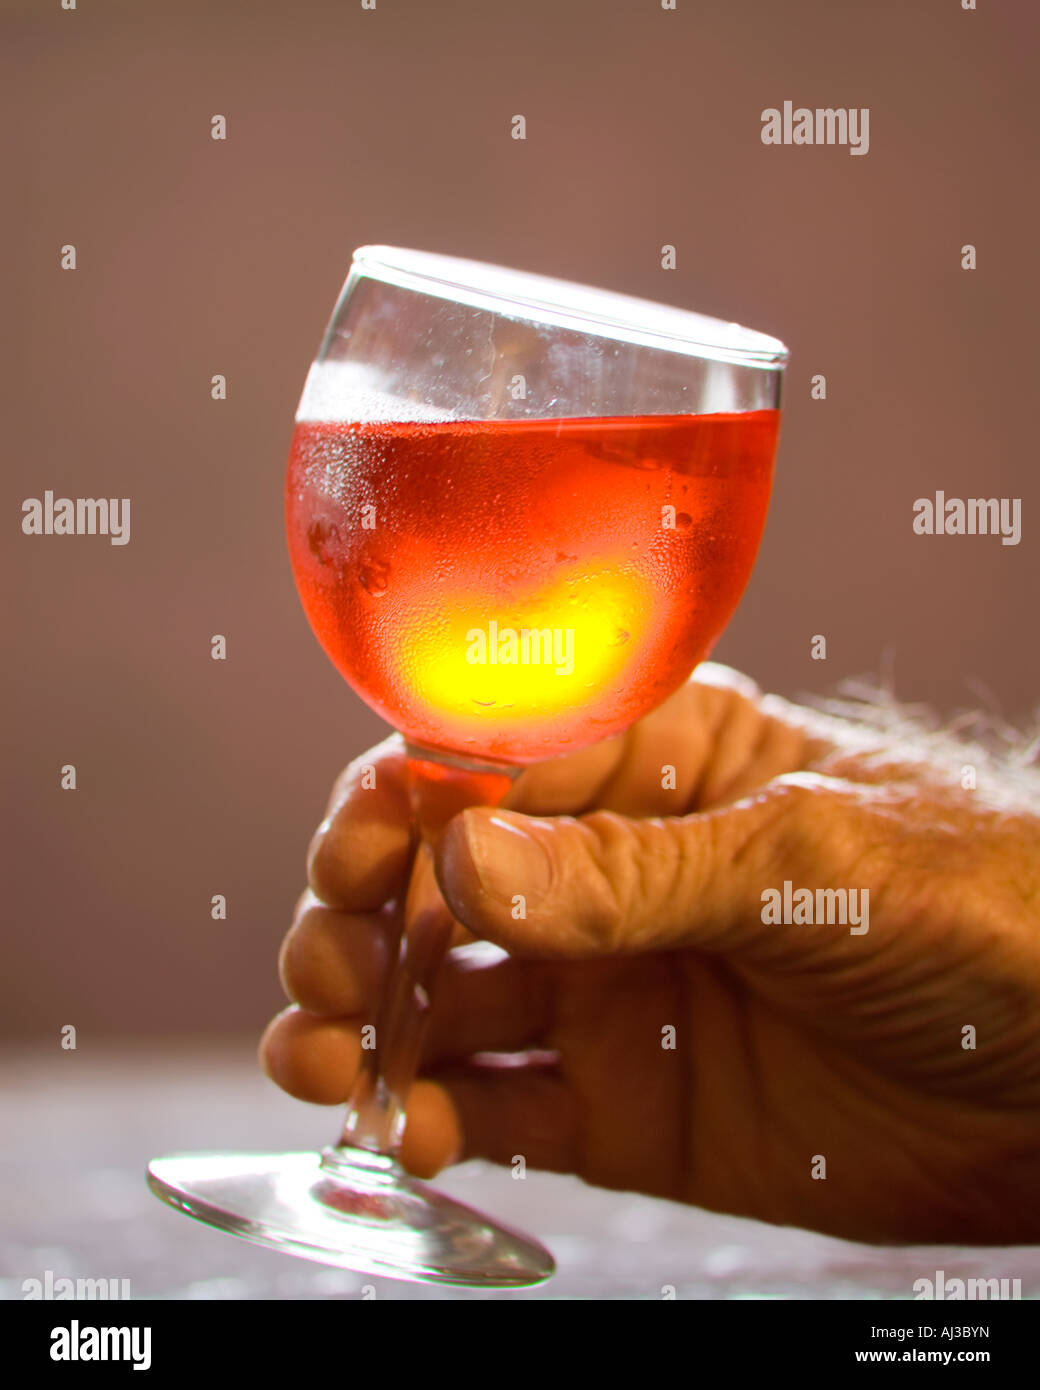 A glass of red wine in an elderly man's hand. USA. Stock Photo